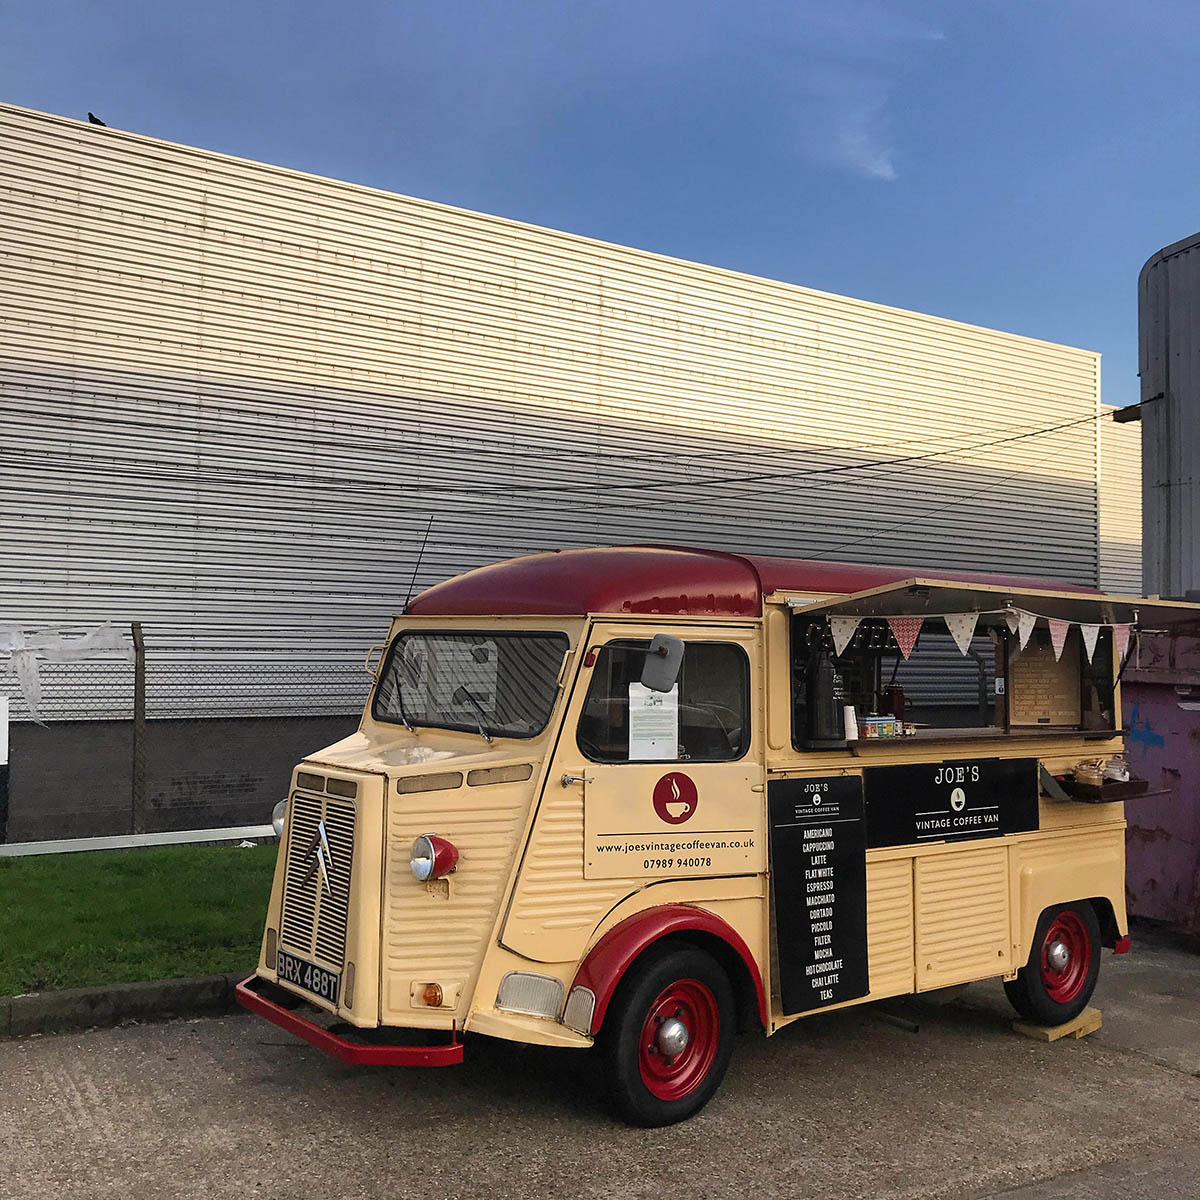 Our Citroën H camionette serving coffee on location